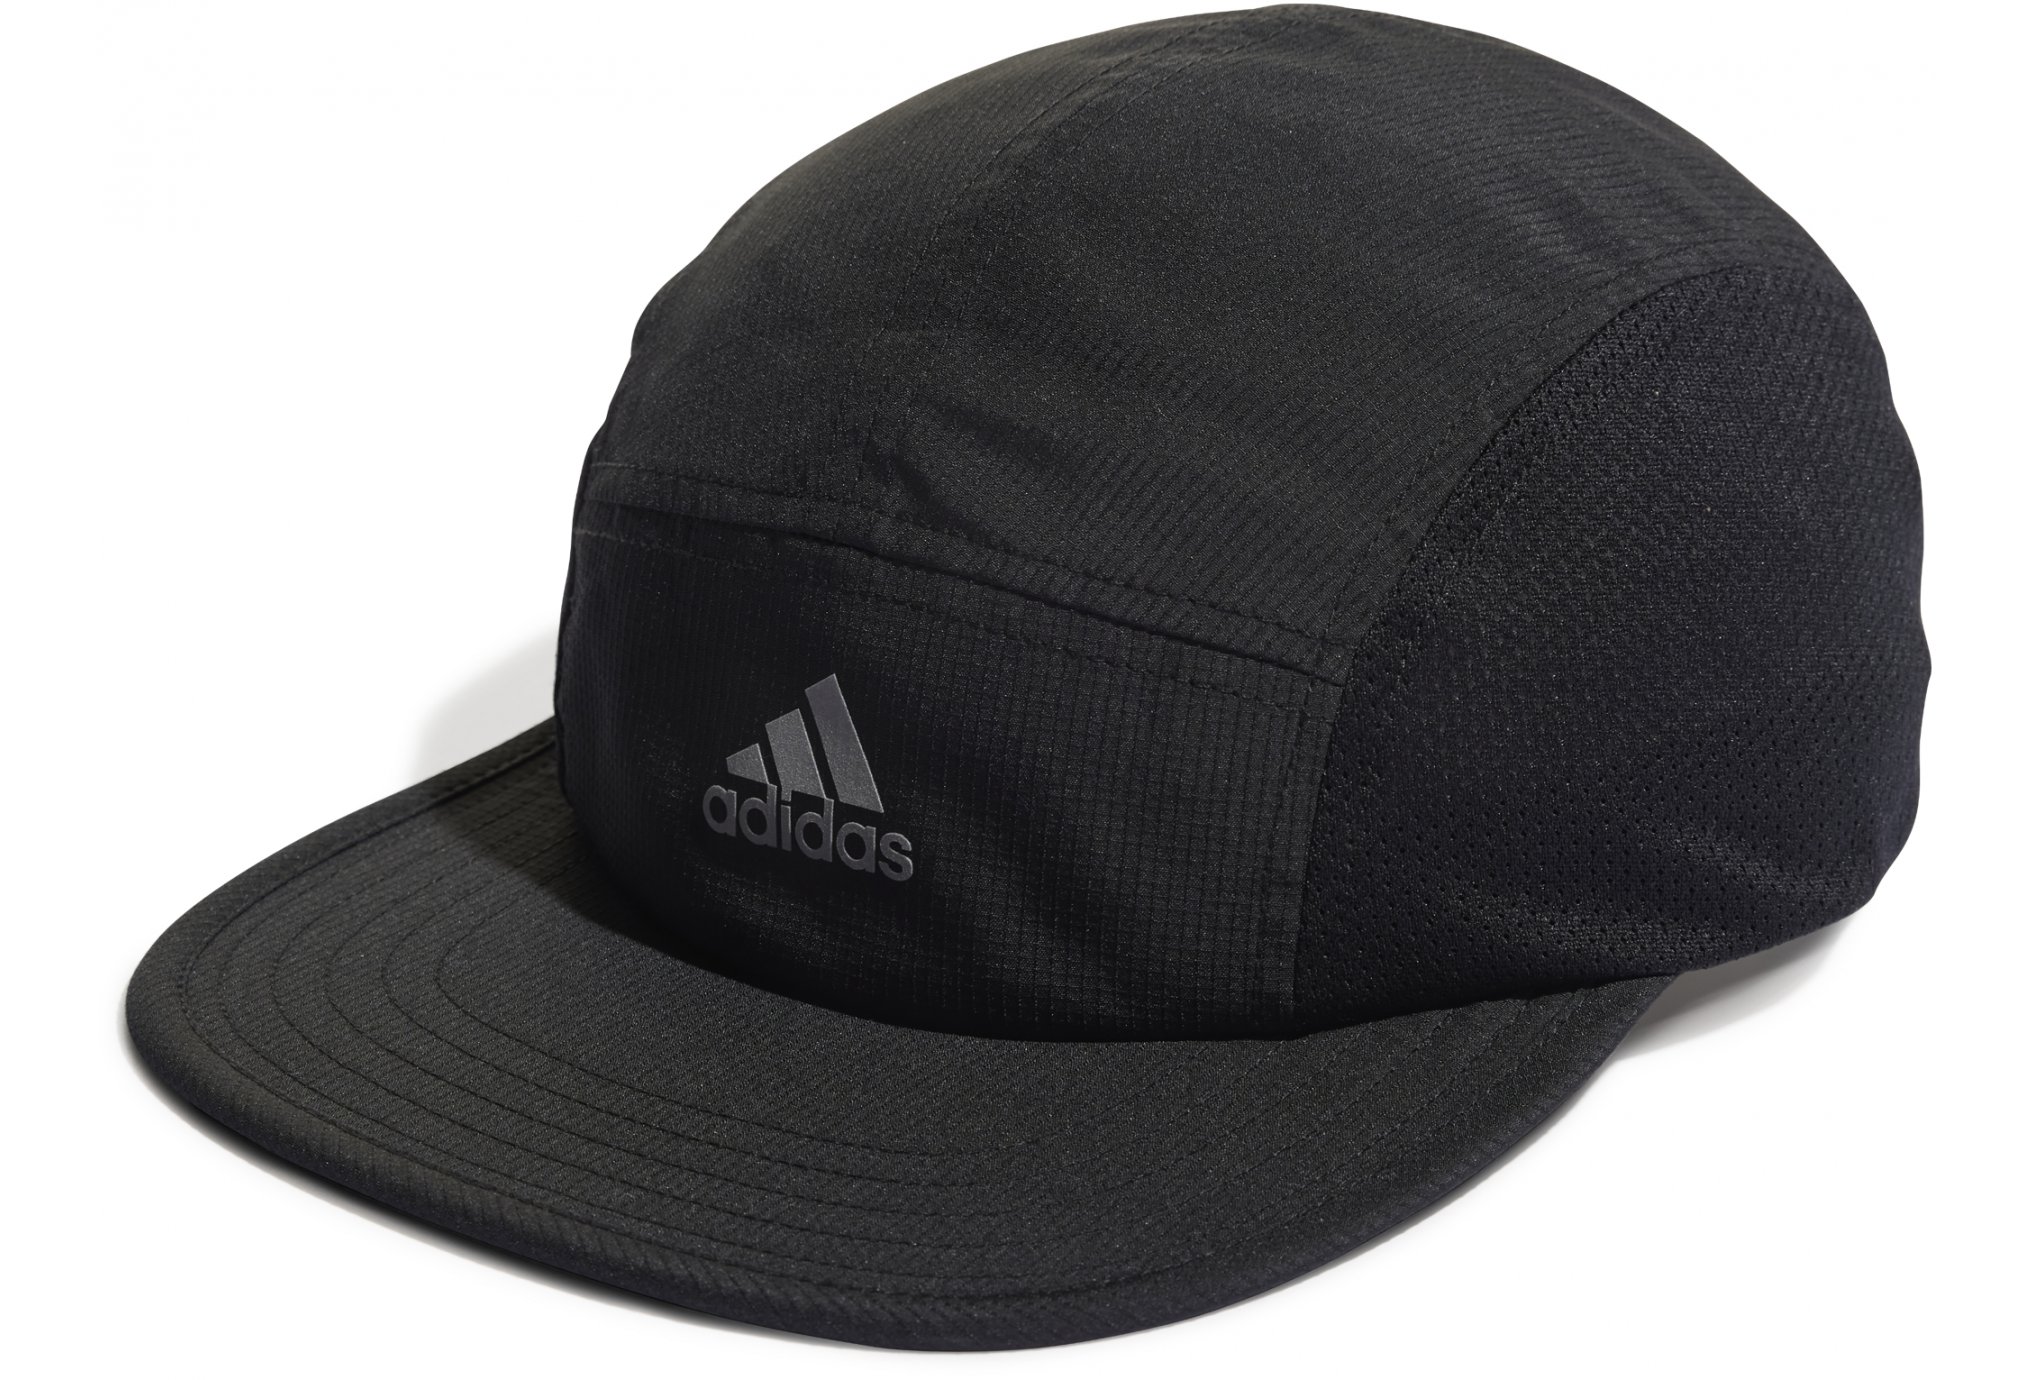 adidas Runner X-City - Large Casquettes / bandeaux